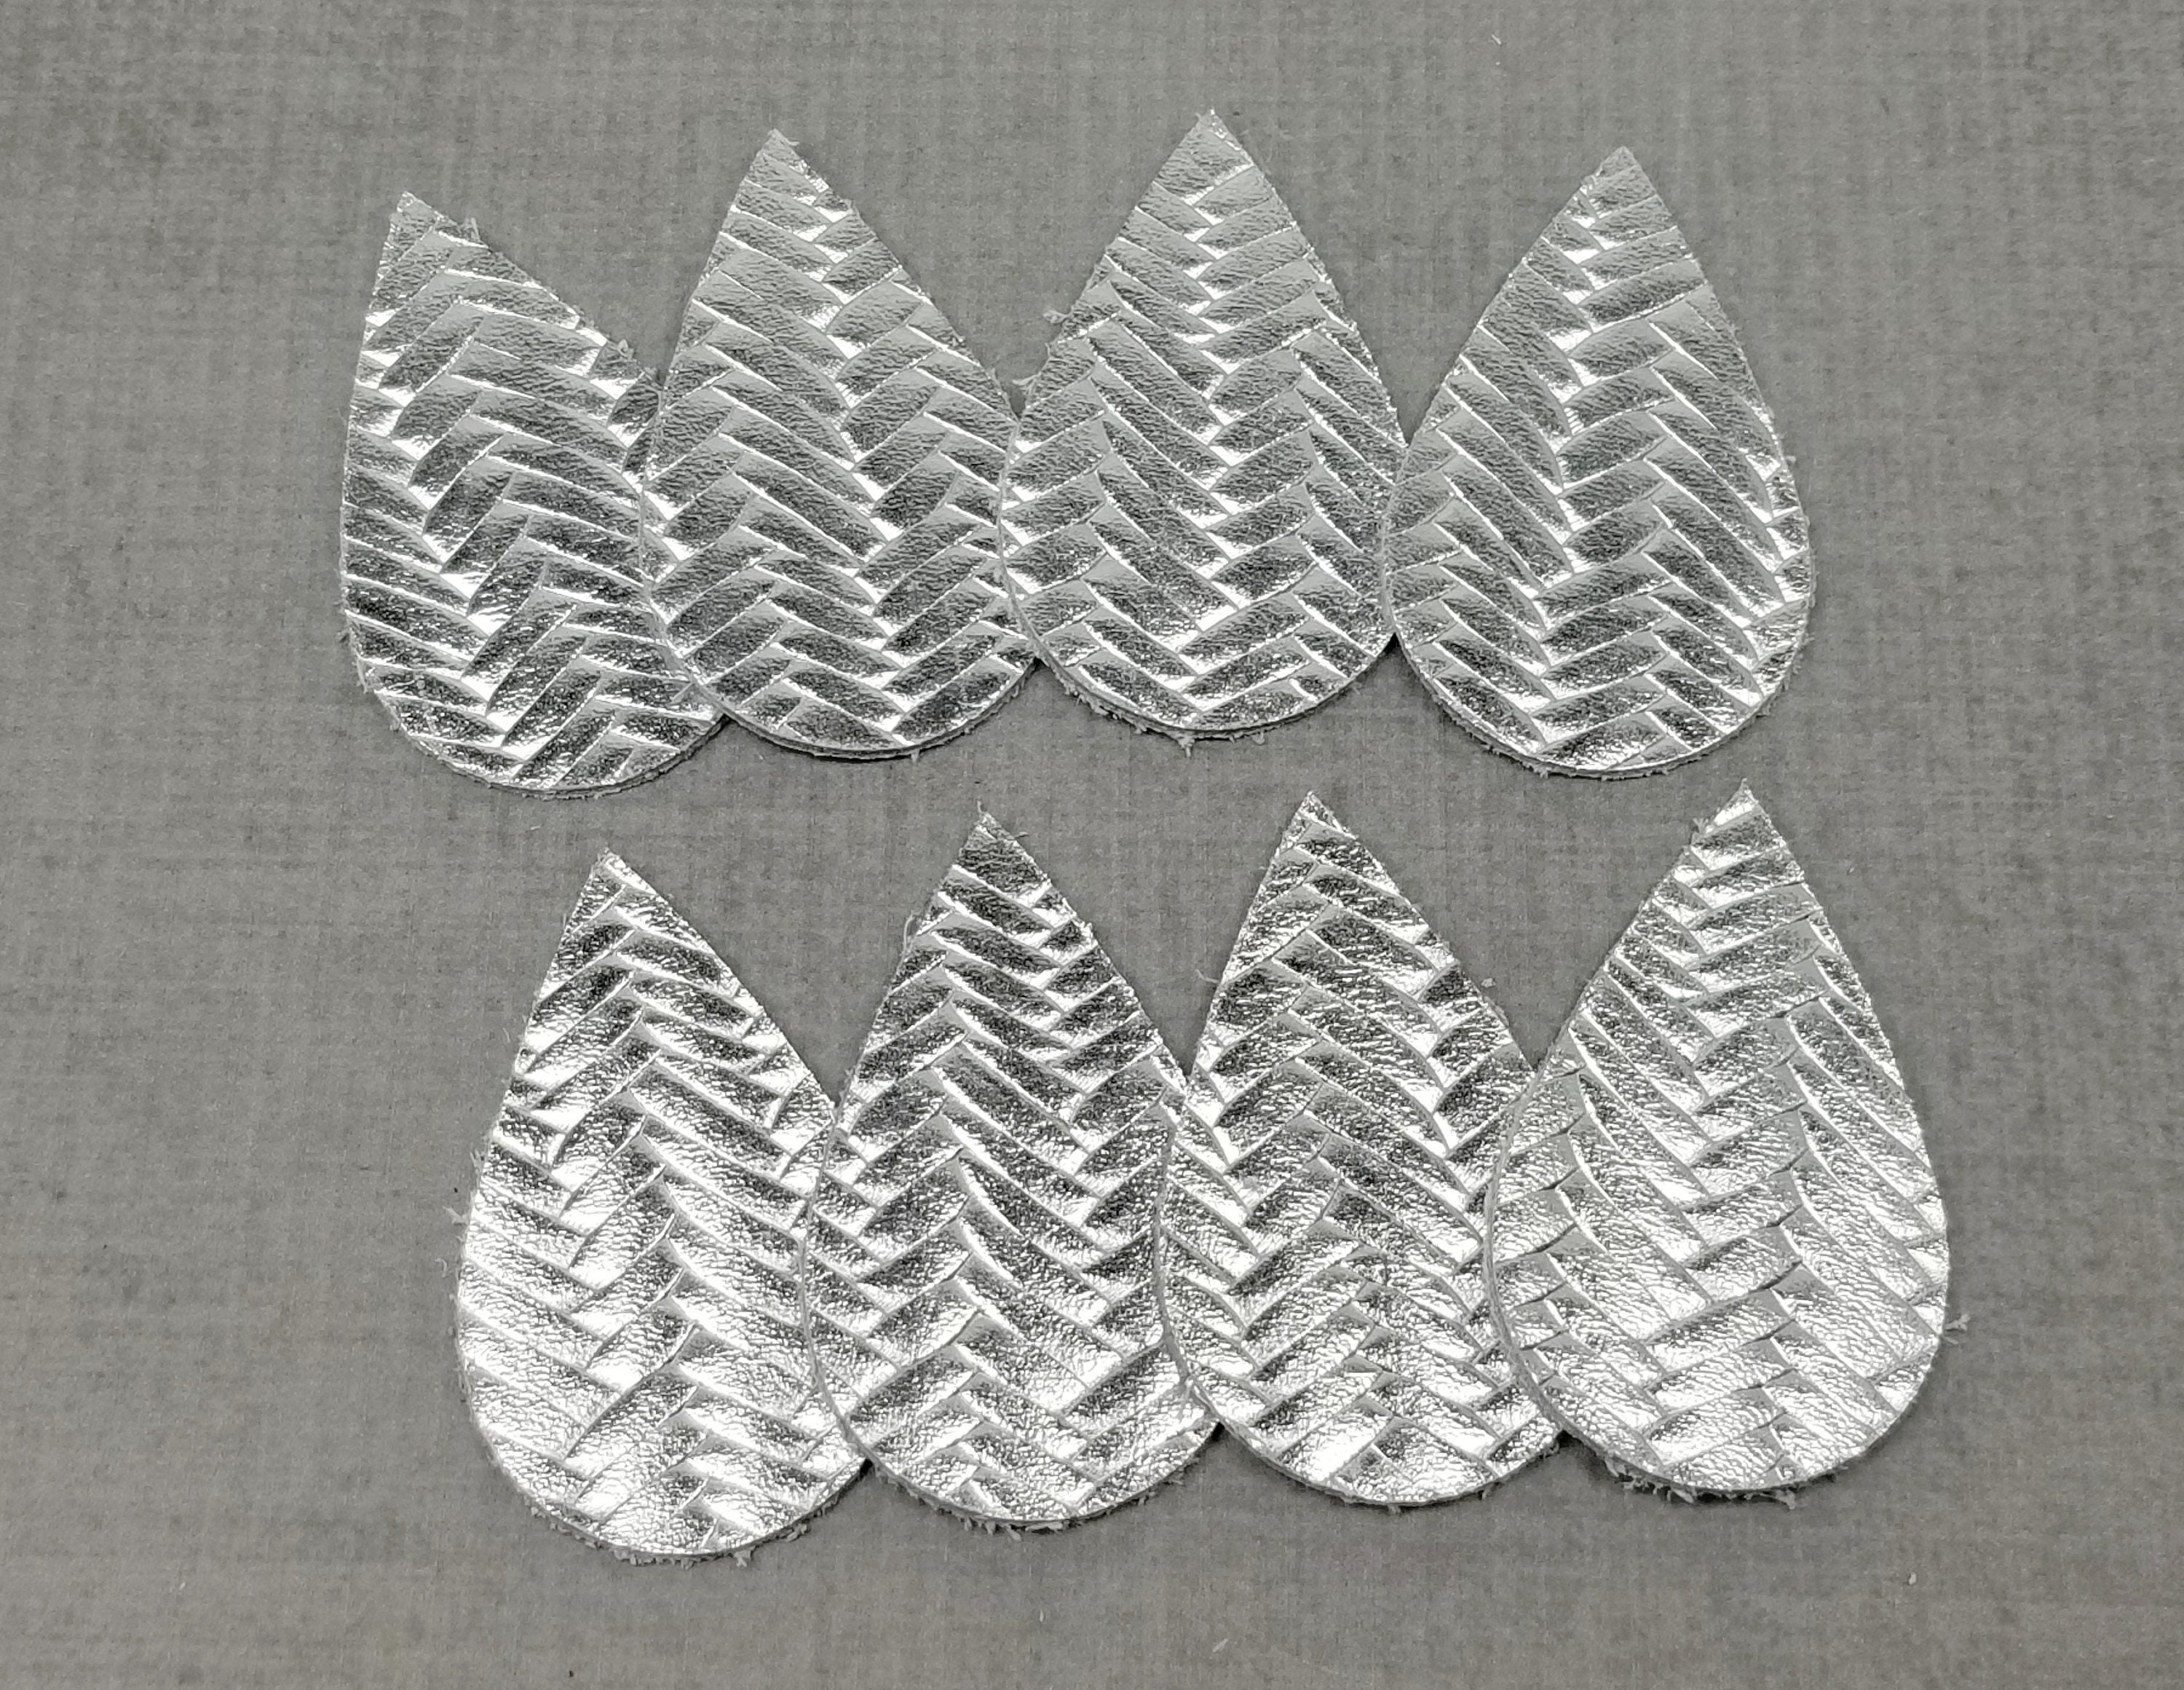 NEW Embossed Leather Teardrops, Metallic Silver, 4 Pairs, Textured